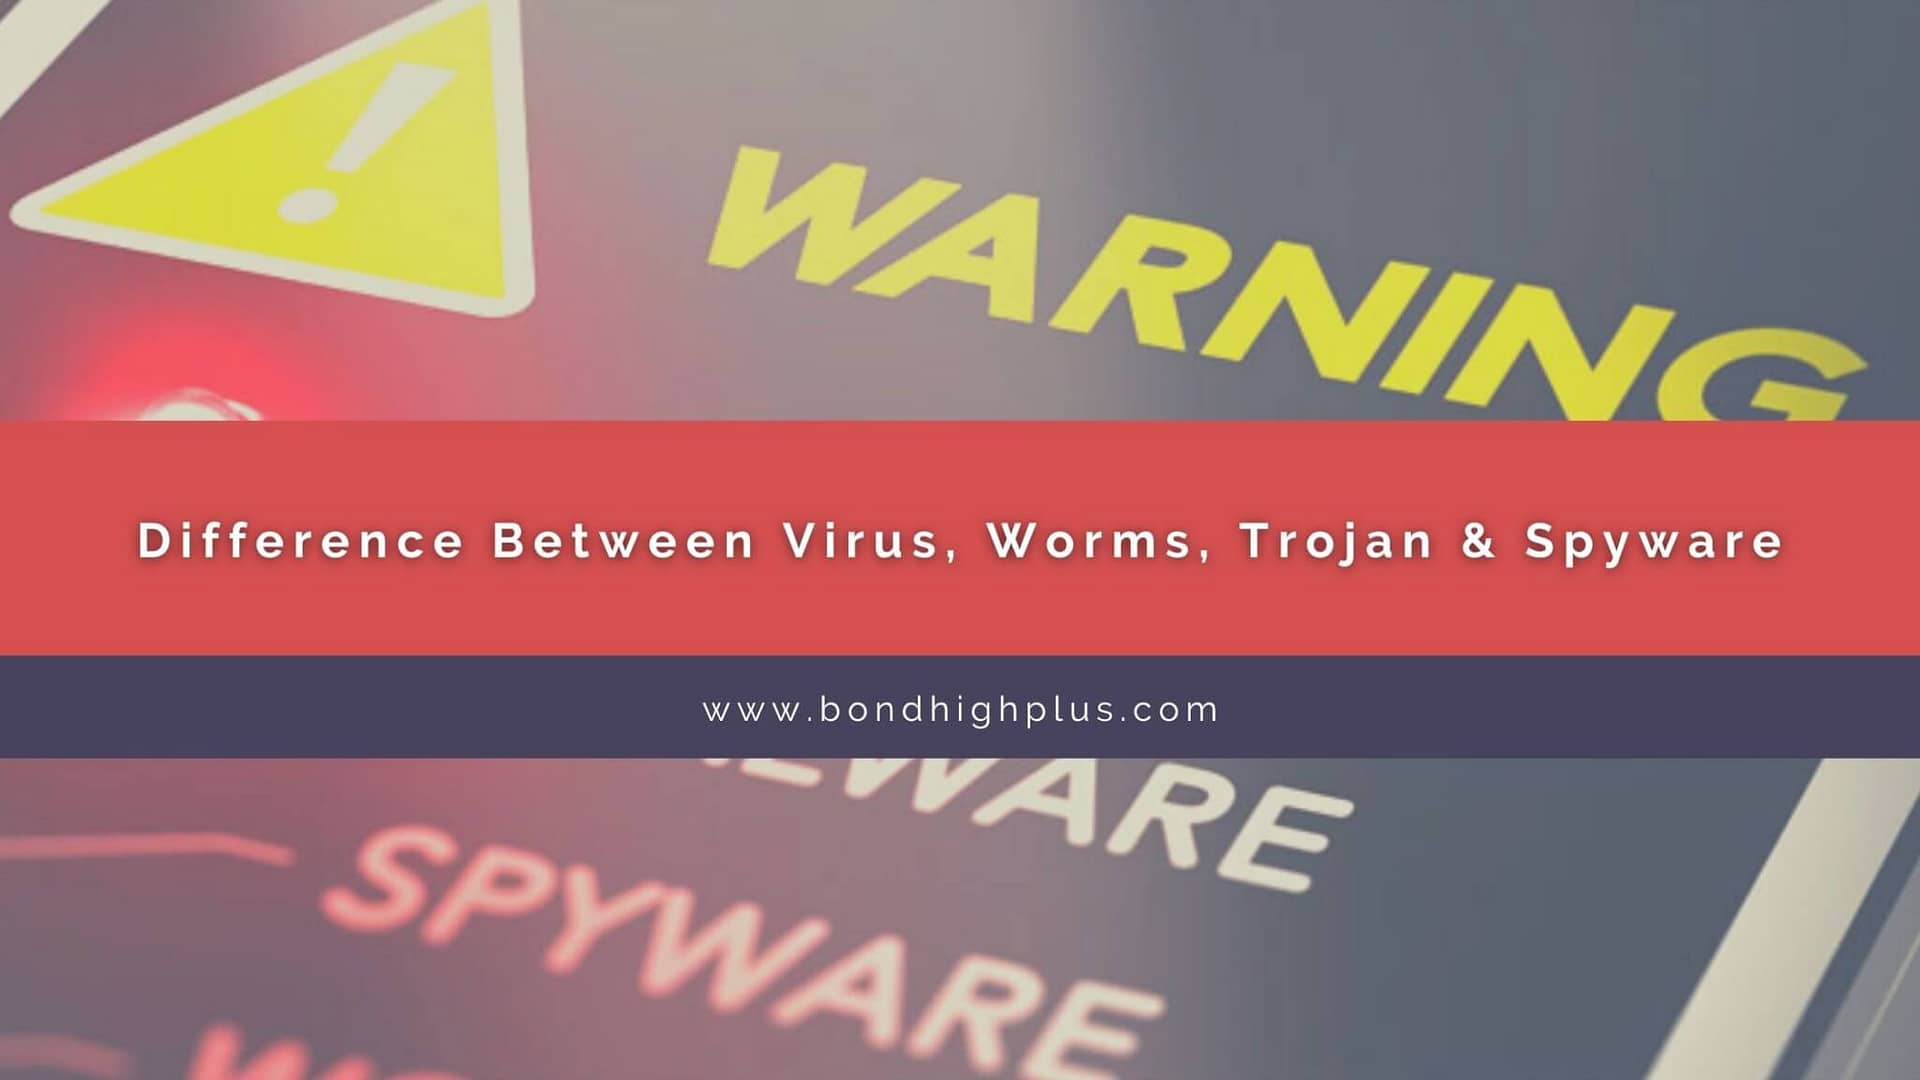 Difference Between Virus, Worms, Trojan & Spyware